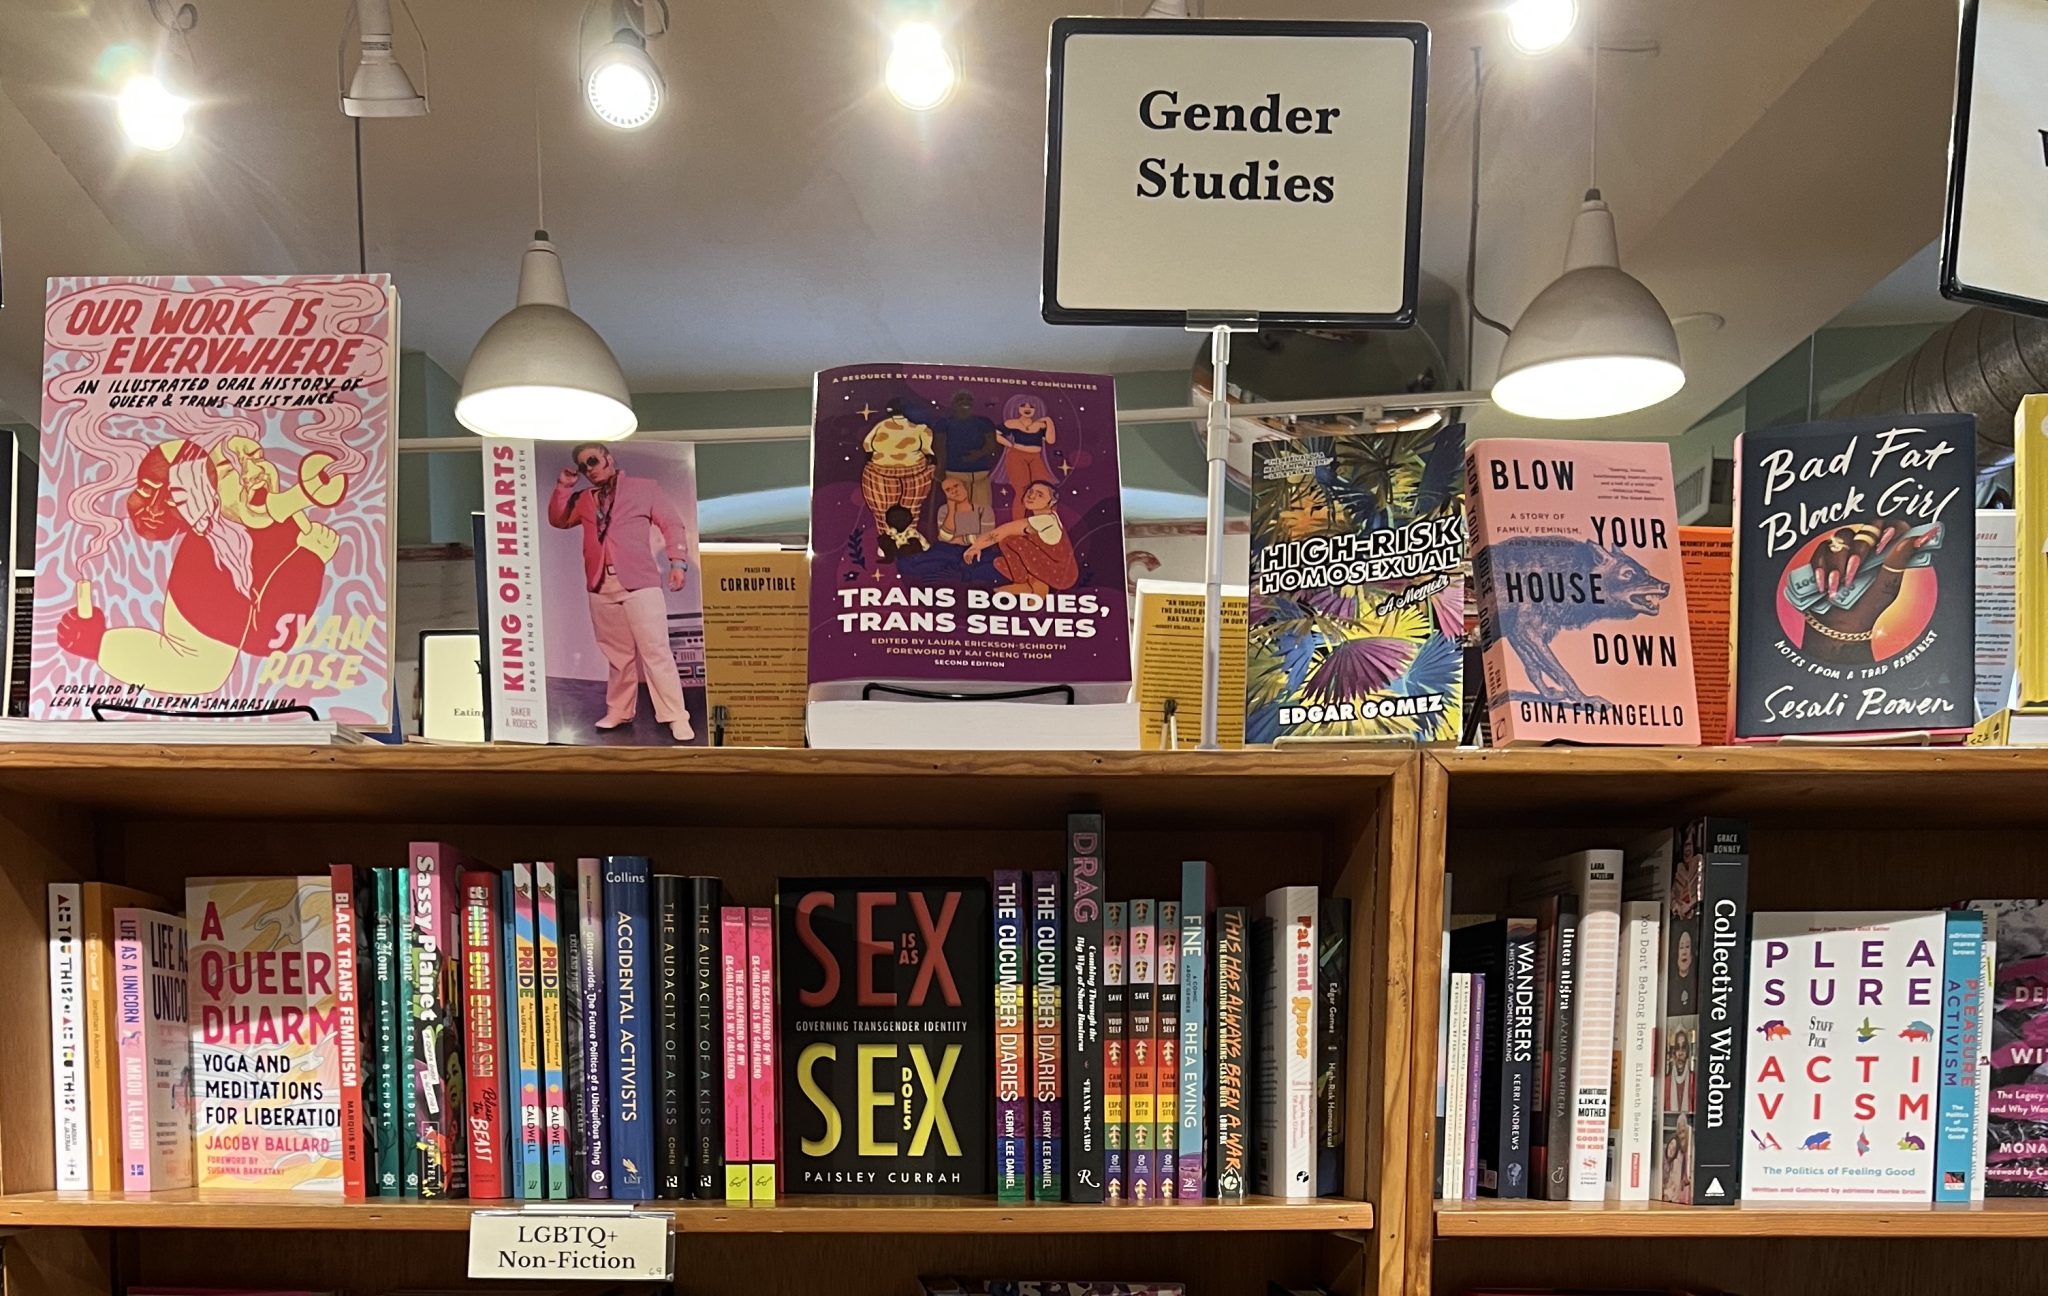 Two wooden bookshelves are pushed together so they seem as if one. A big prominent white sign in a silver outline says "Gender Studies" on it in black. It is proudly displayed on the top shelf and there are books on either side of it and below that are about Trans people, queer people, sex, and more. There is a small sign attached to the lowest visible shelf that says LGBTQ+ Non-Fiction. The background is mostly a white ceiling with some green trim and a few lights that are on.